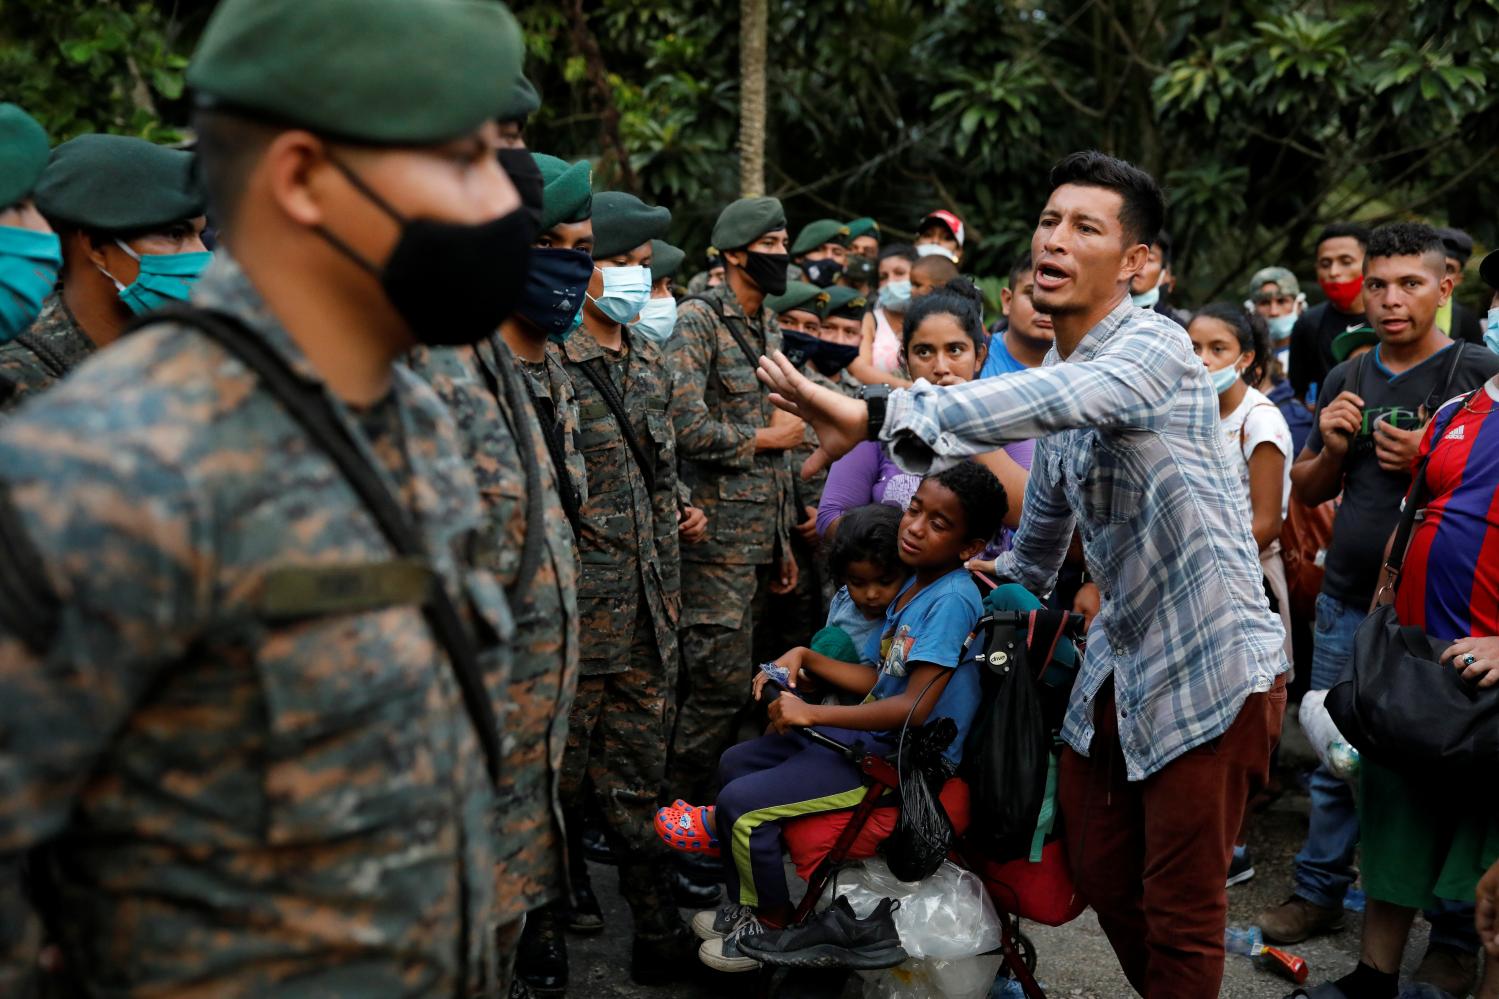 A Honduran migrant trying to reach the U.S. with his sons talks to Guatemalan soldiers blocking a road to stop migrants from reach the Mexico's border, in San Pedro Cadenas, Izabal, Guatemala October 2, 2020. REUTERS/Luis Echeverria